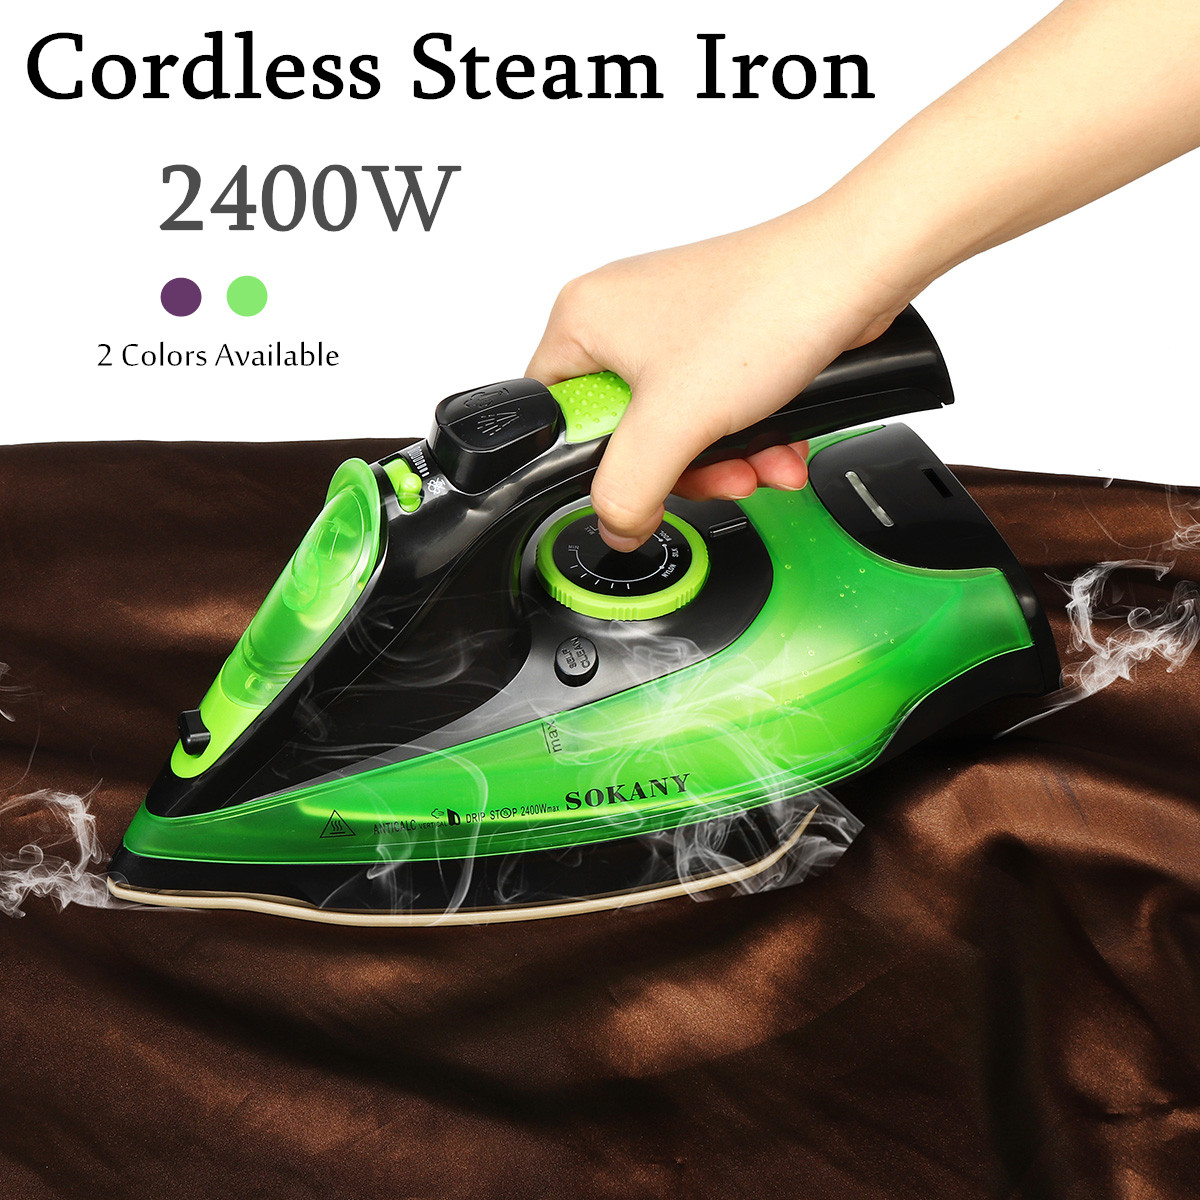 2400W-220V-Cordless-Steam-Iron-Multifunction-Clothes-Docking-Station-Dry-Ironing-Industry-1346803-1